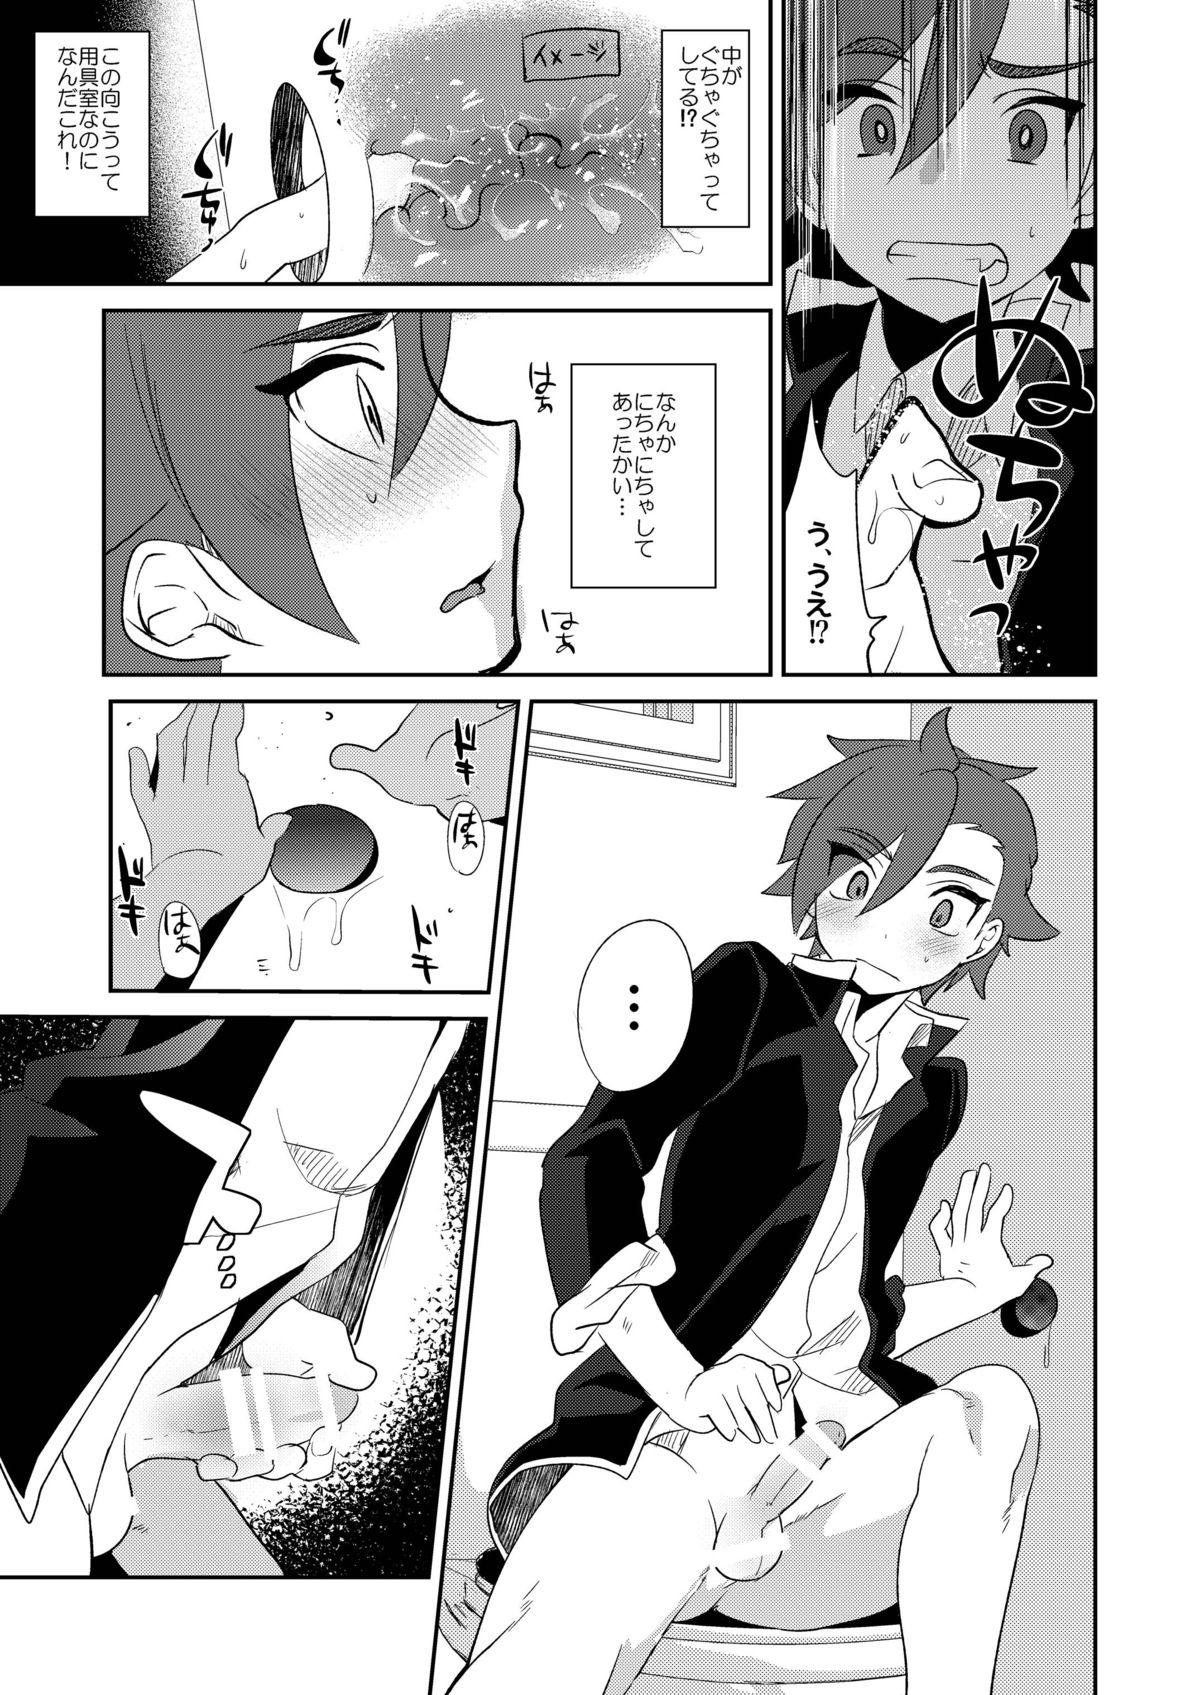 Stretching Onasekai + Omake - Gundam build fighters try Blowjobs - Page 7